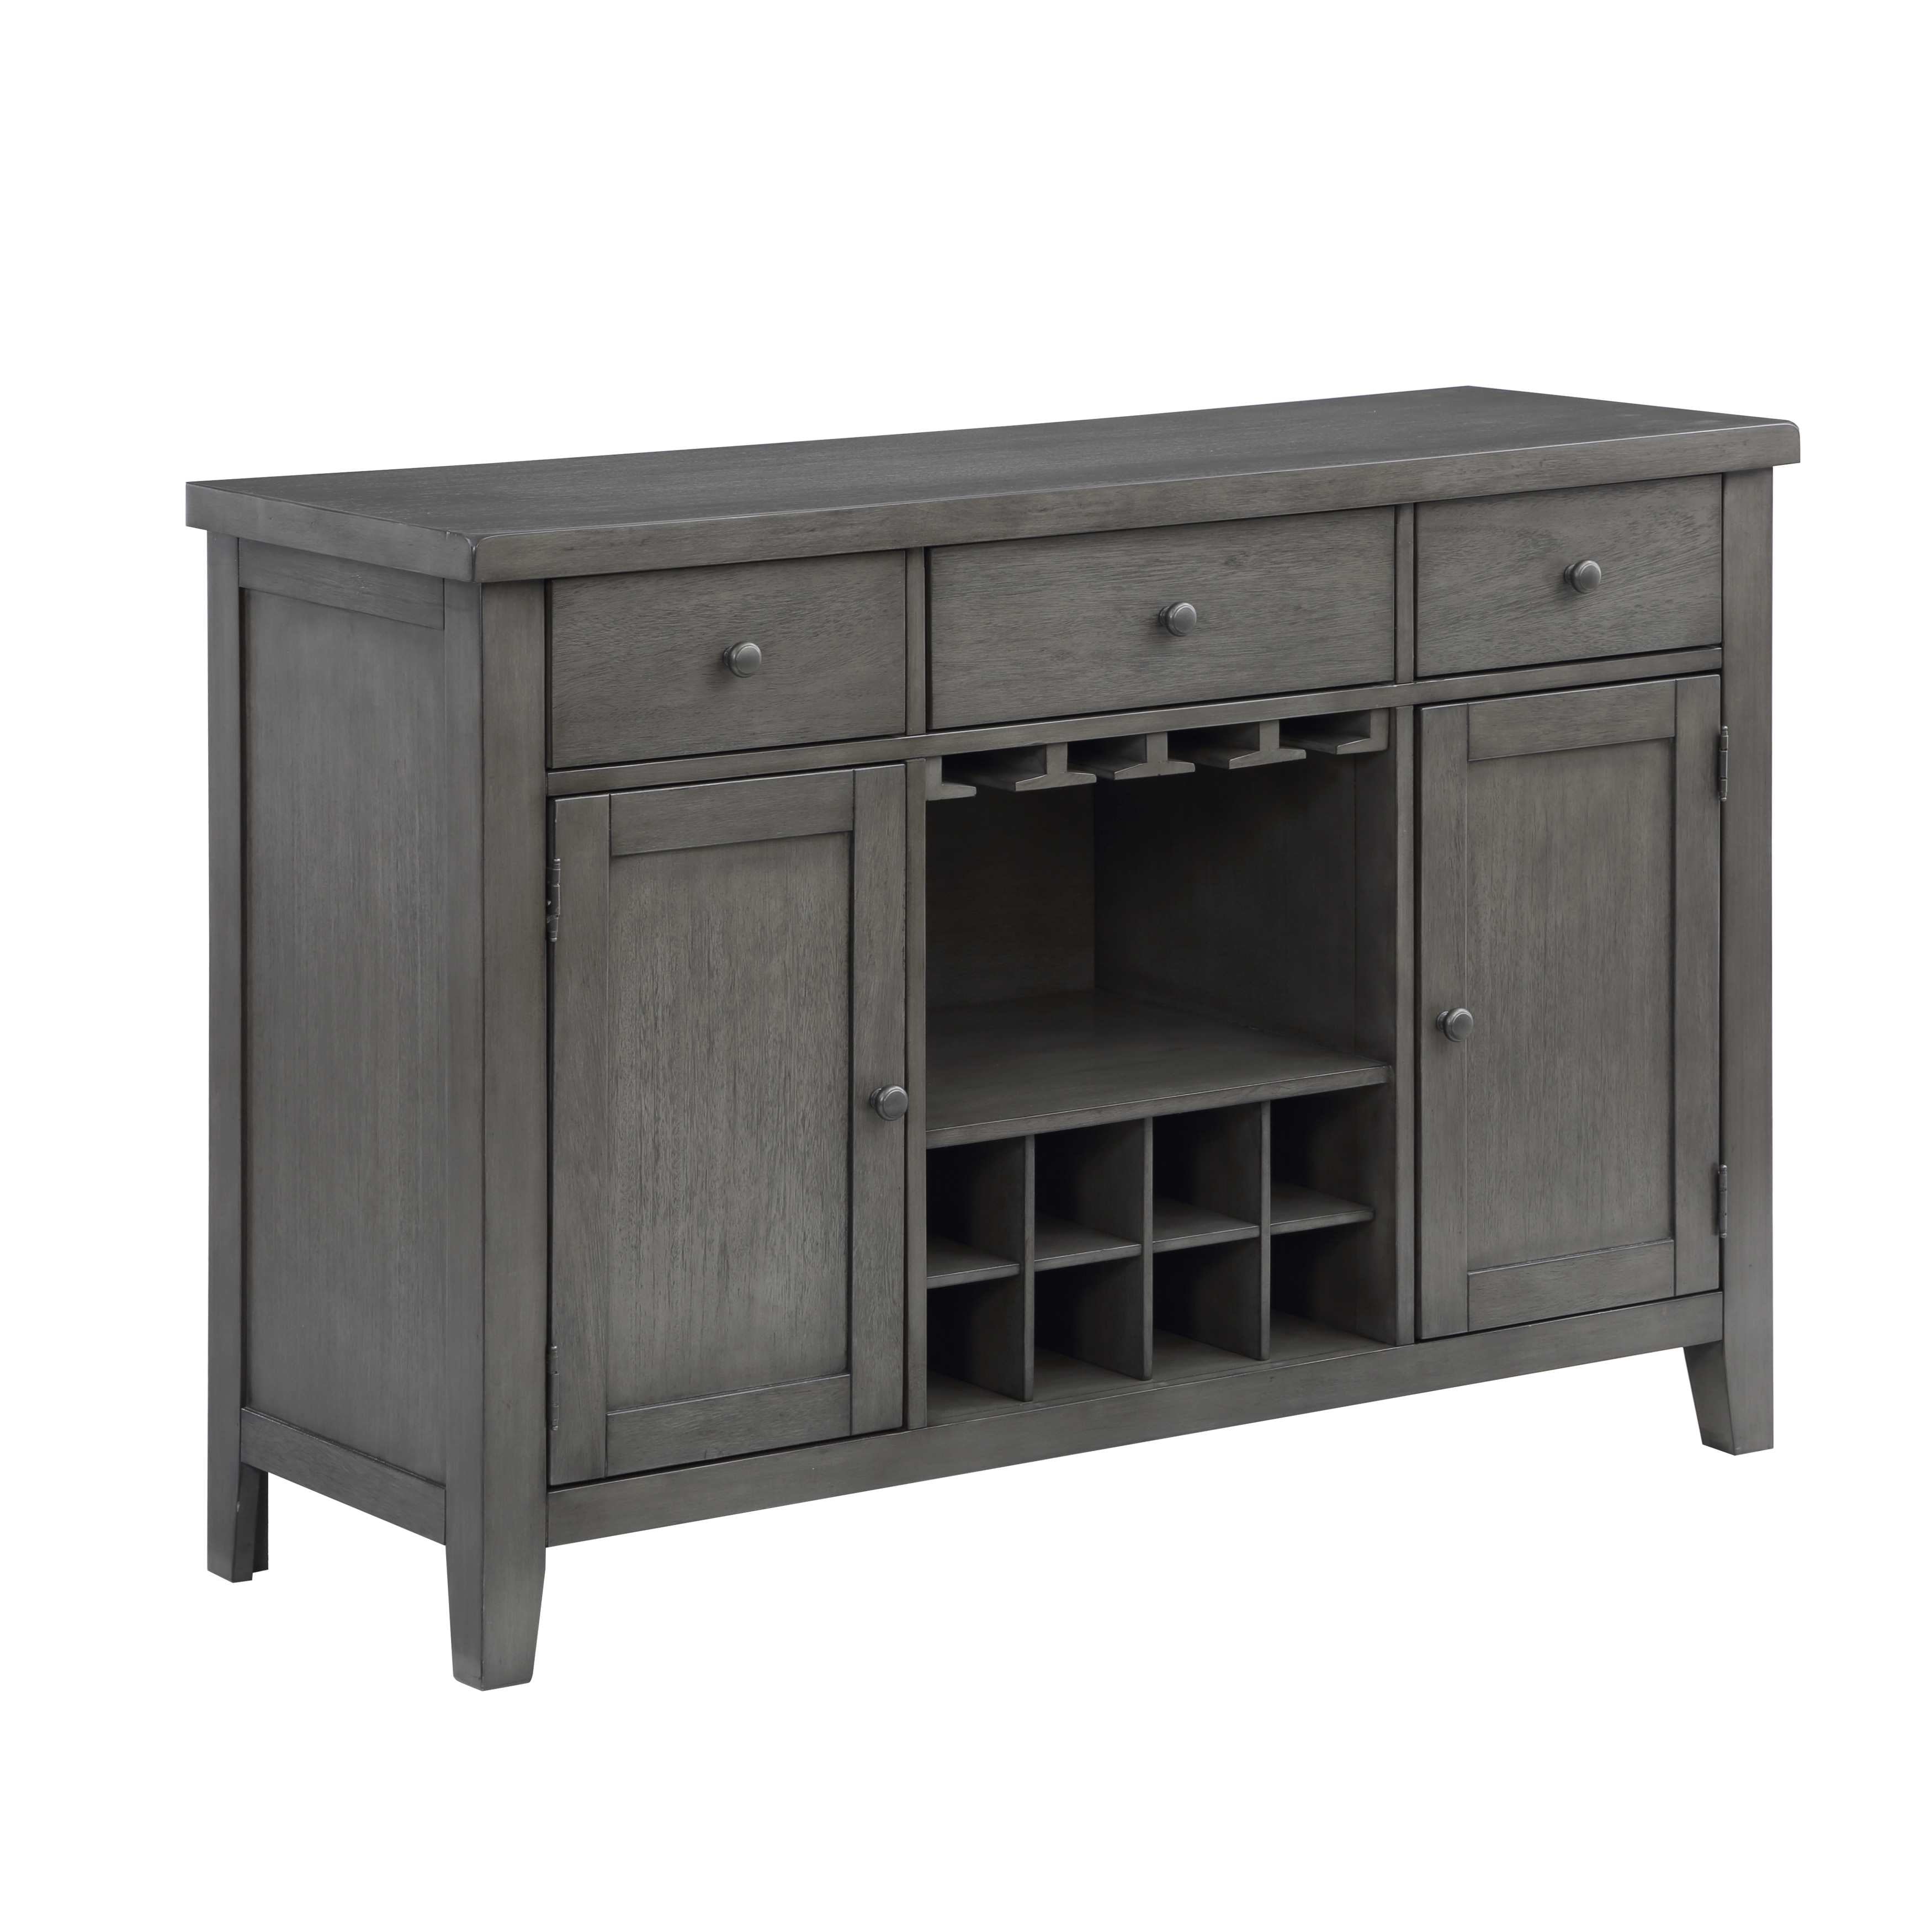 Nashua Dining Collection 5567-72GY